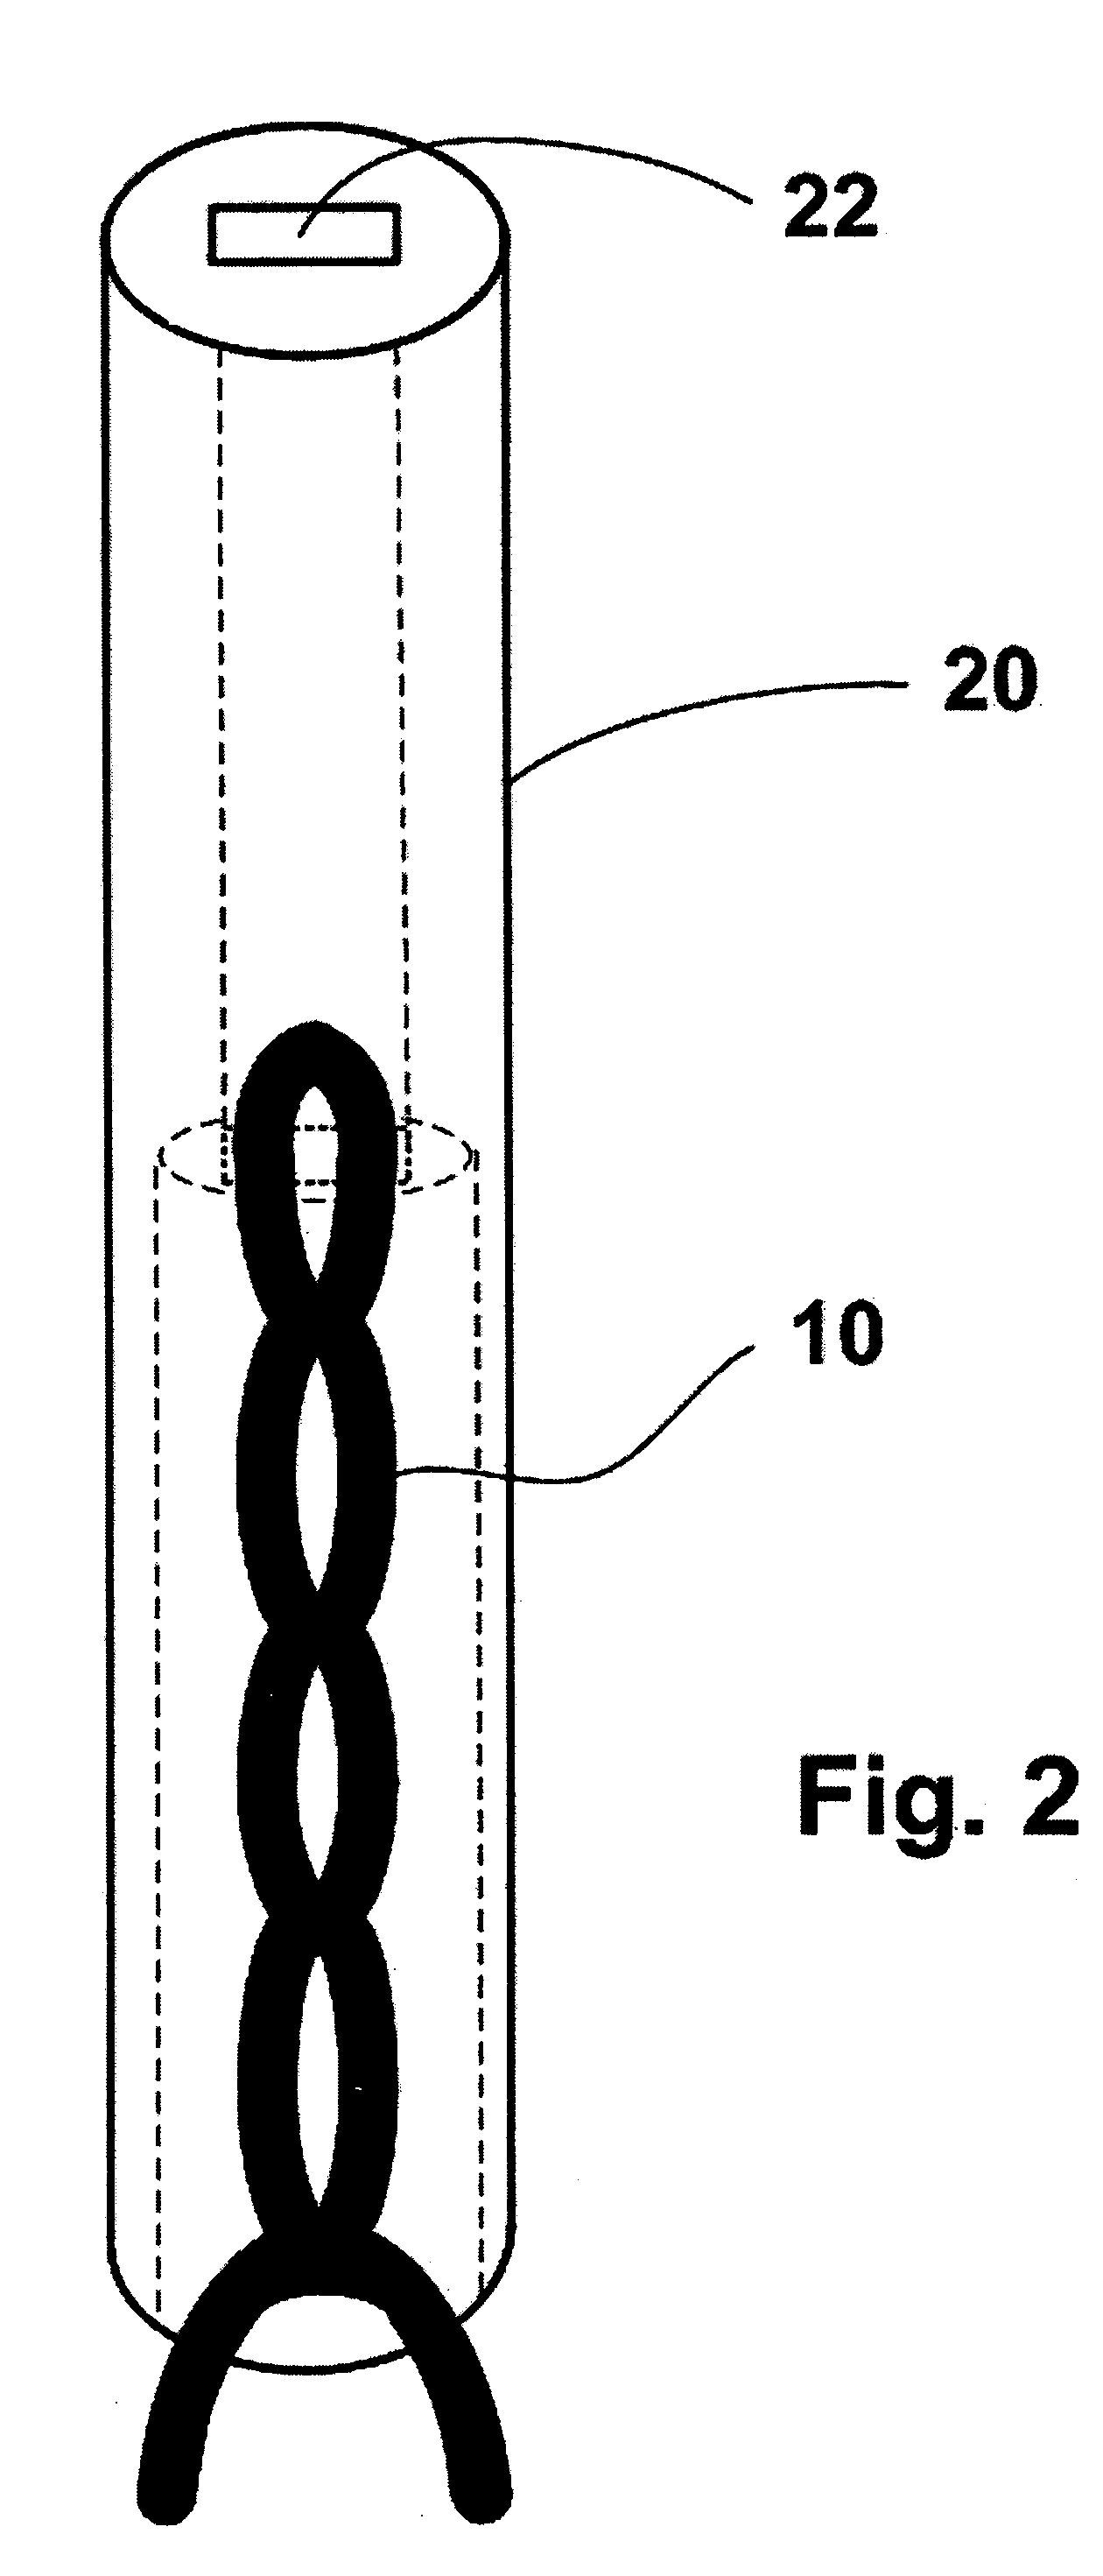 Microwave tunable inductor and associated methods